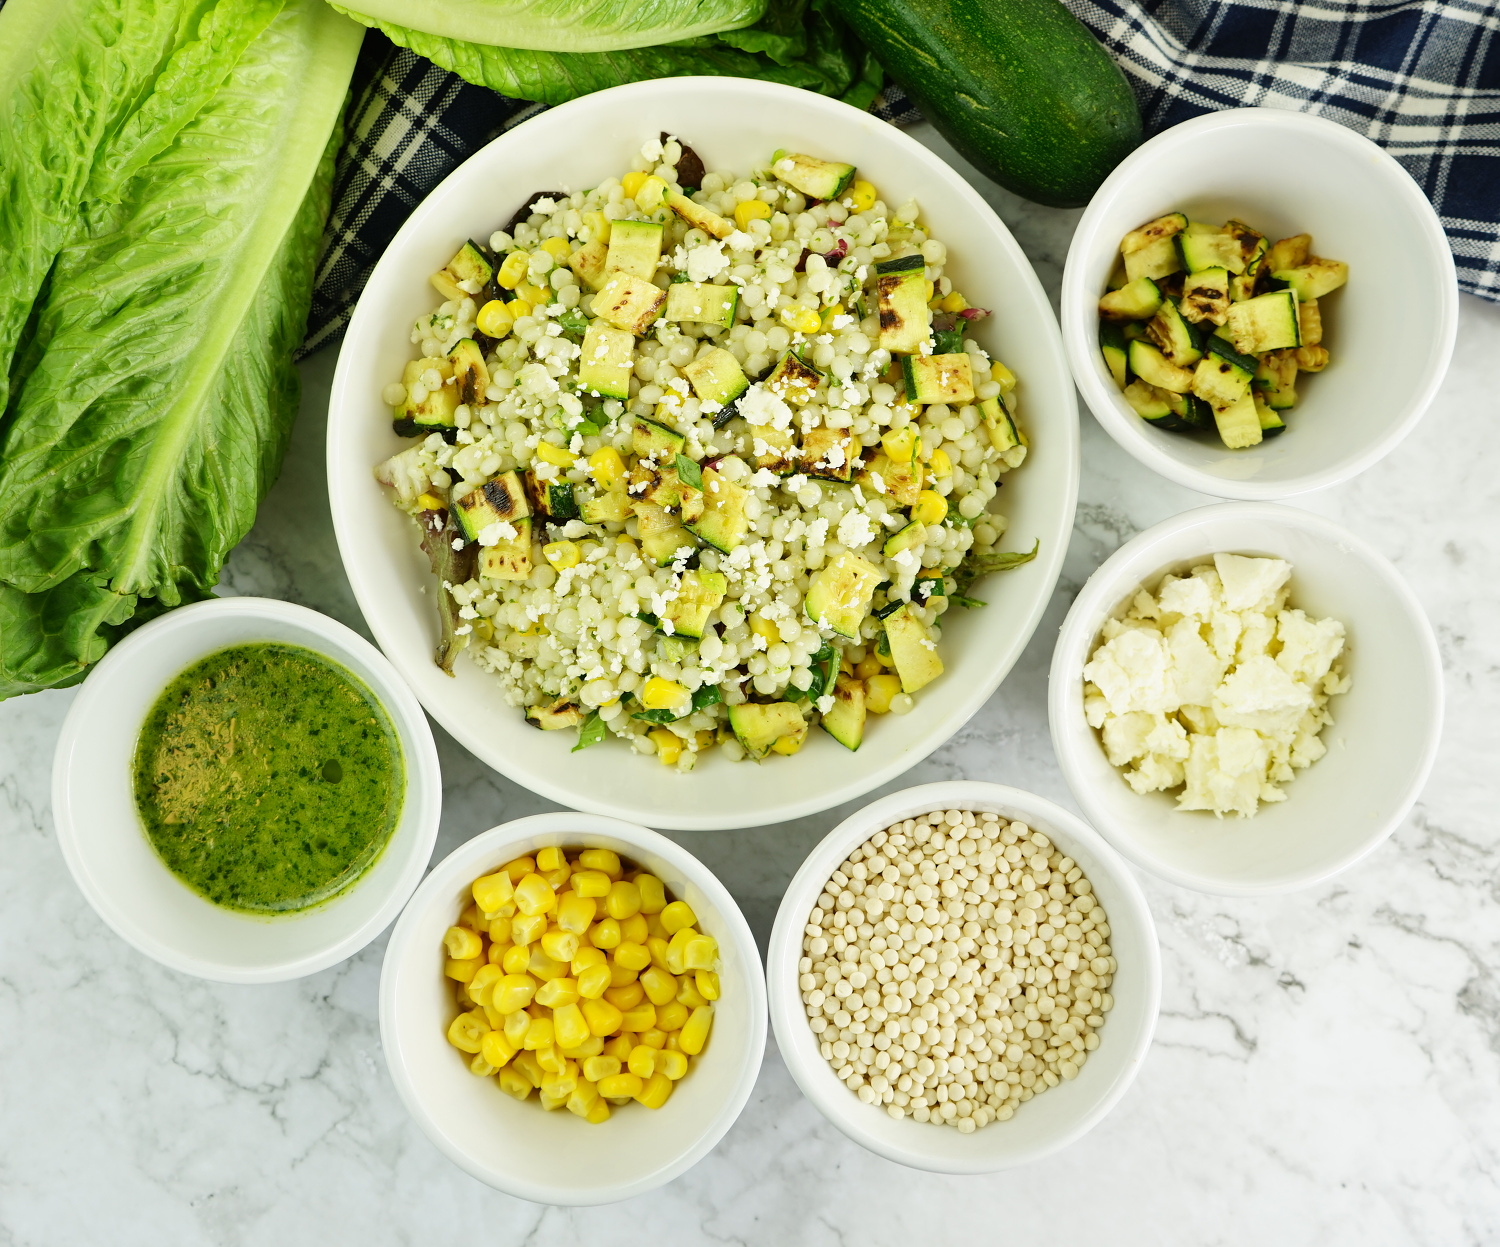 Israeli Couscous Zucchini Salad with Cilantro Lime Dressing